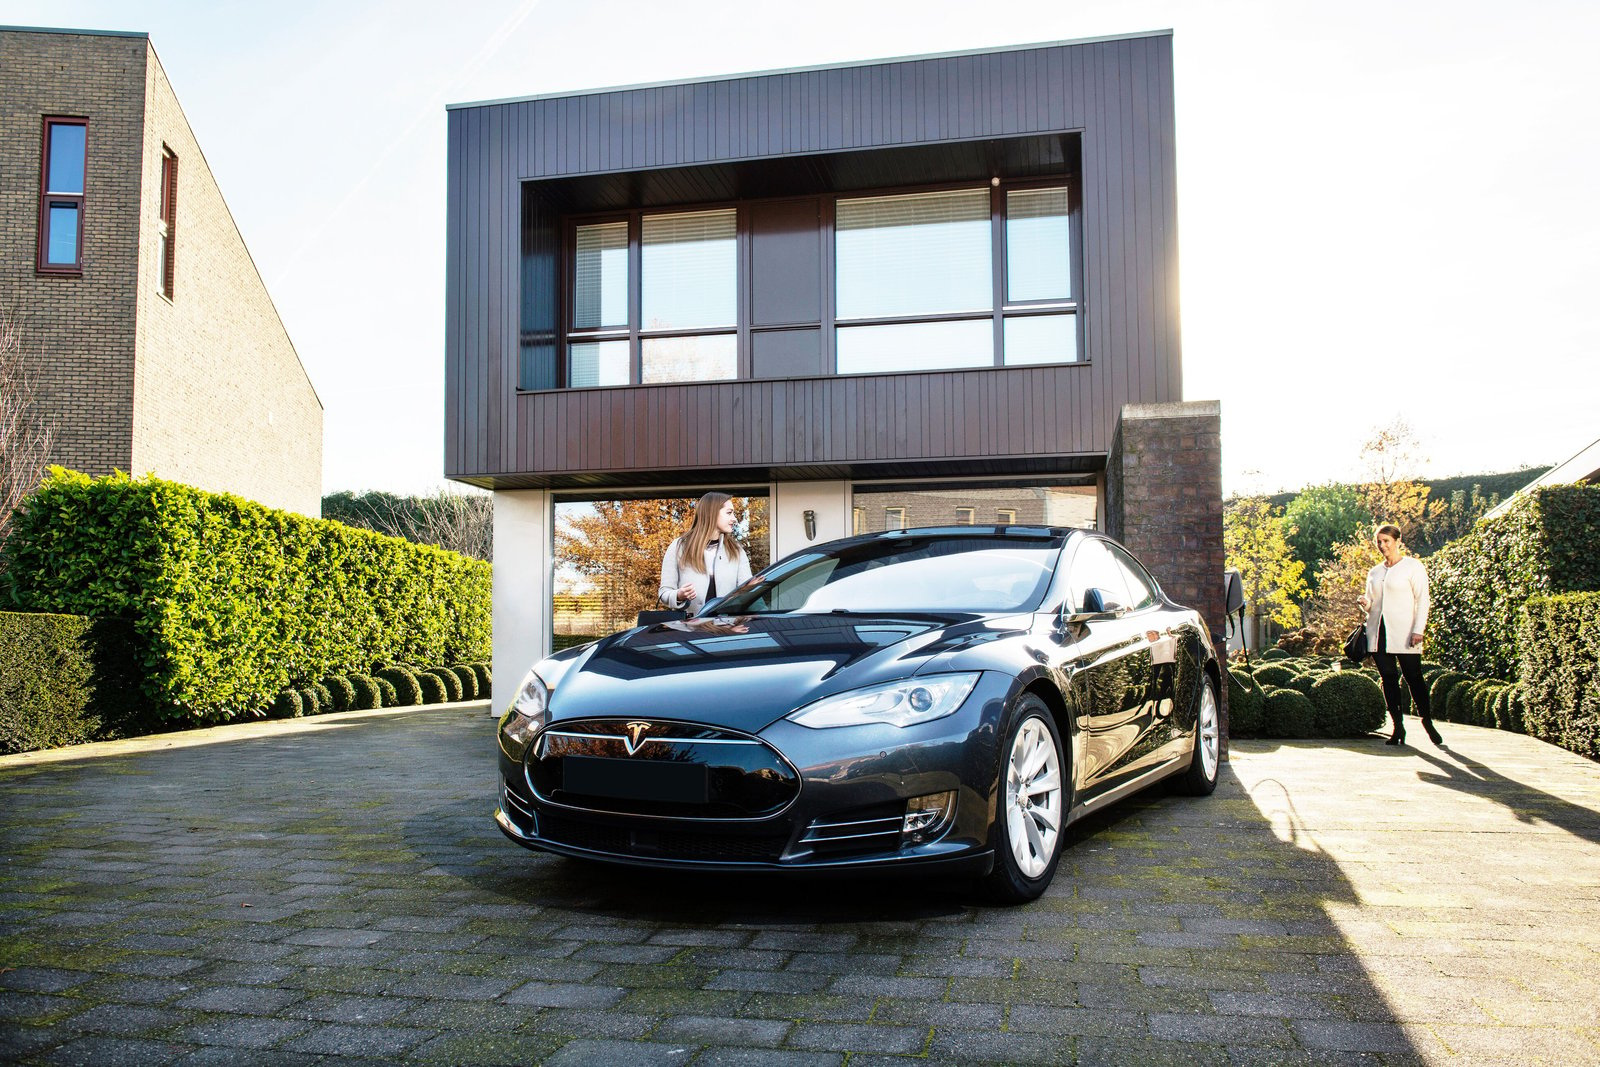 A black Tesla is parked in front of a modern house on a sunny day. A woman is approaching the vehicle and another person is standing in the background, next to the house.